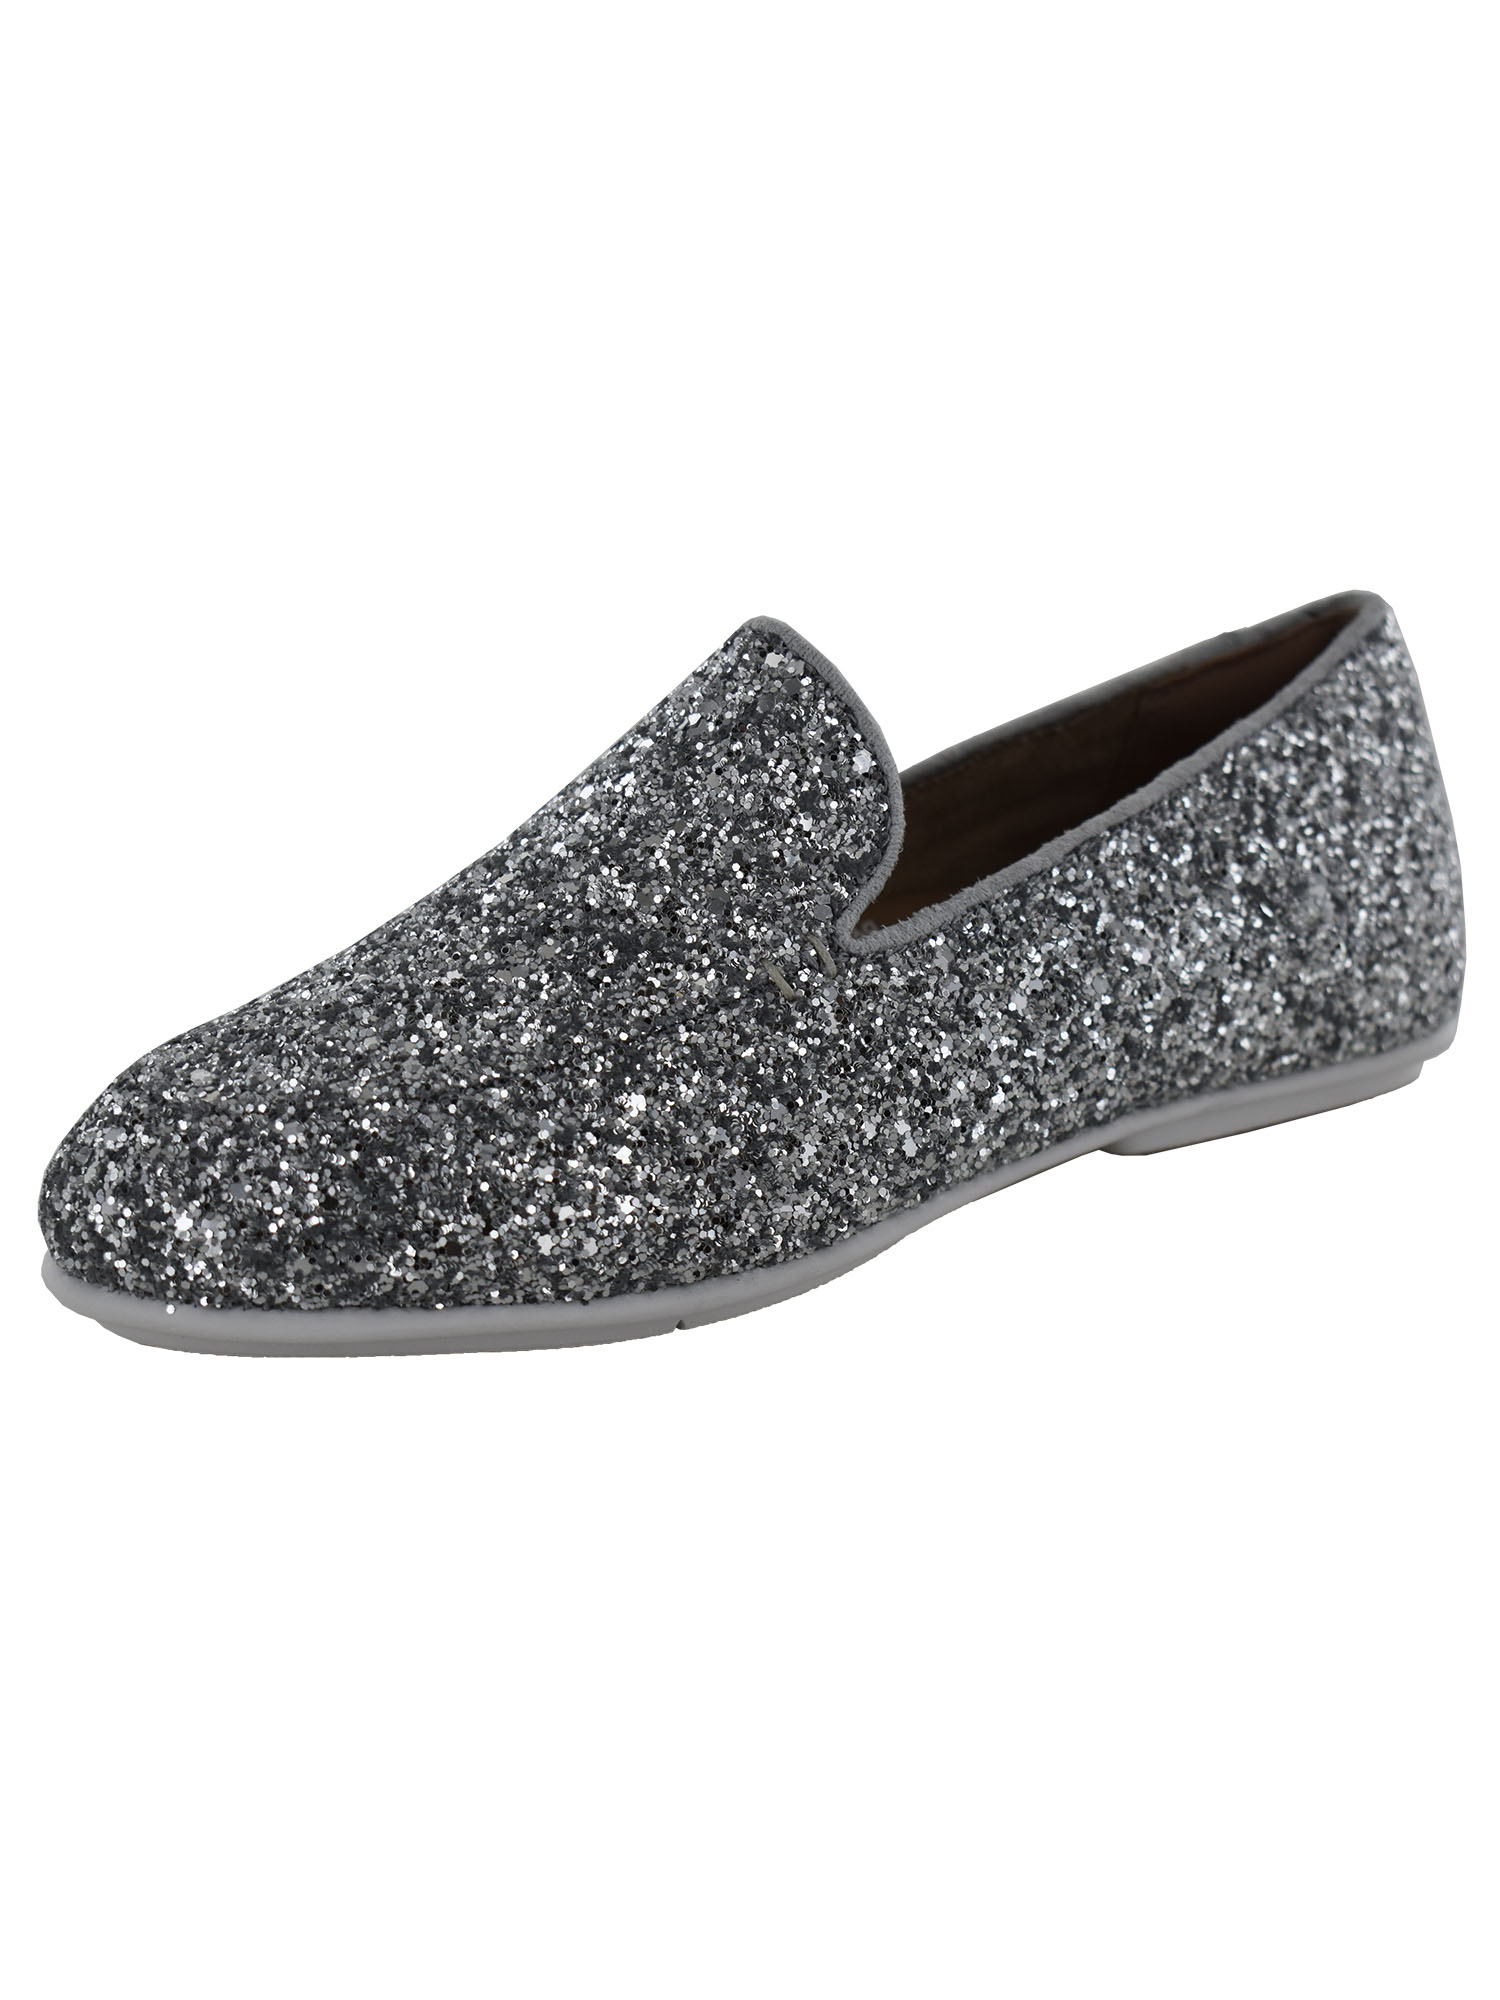 Fitflop Womens Lena Glitter Loafer Shoes